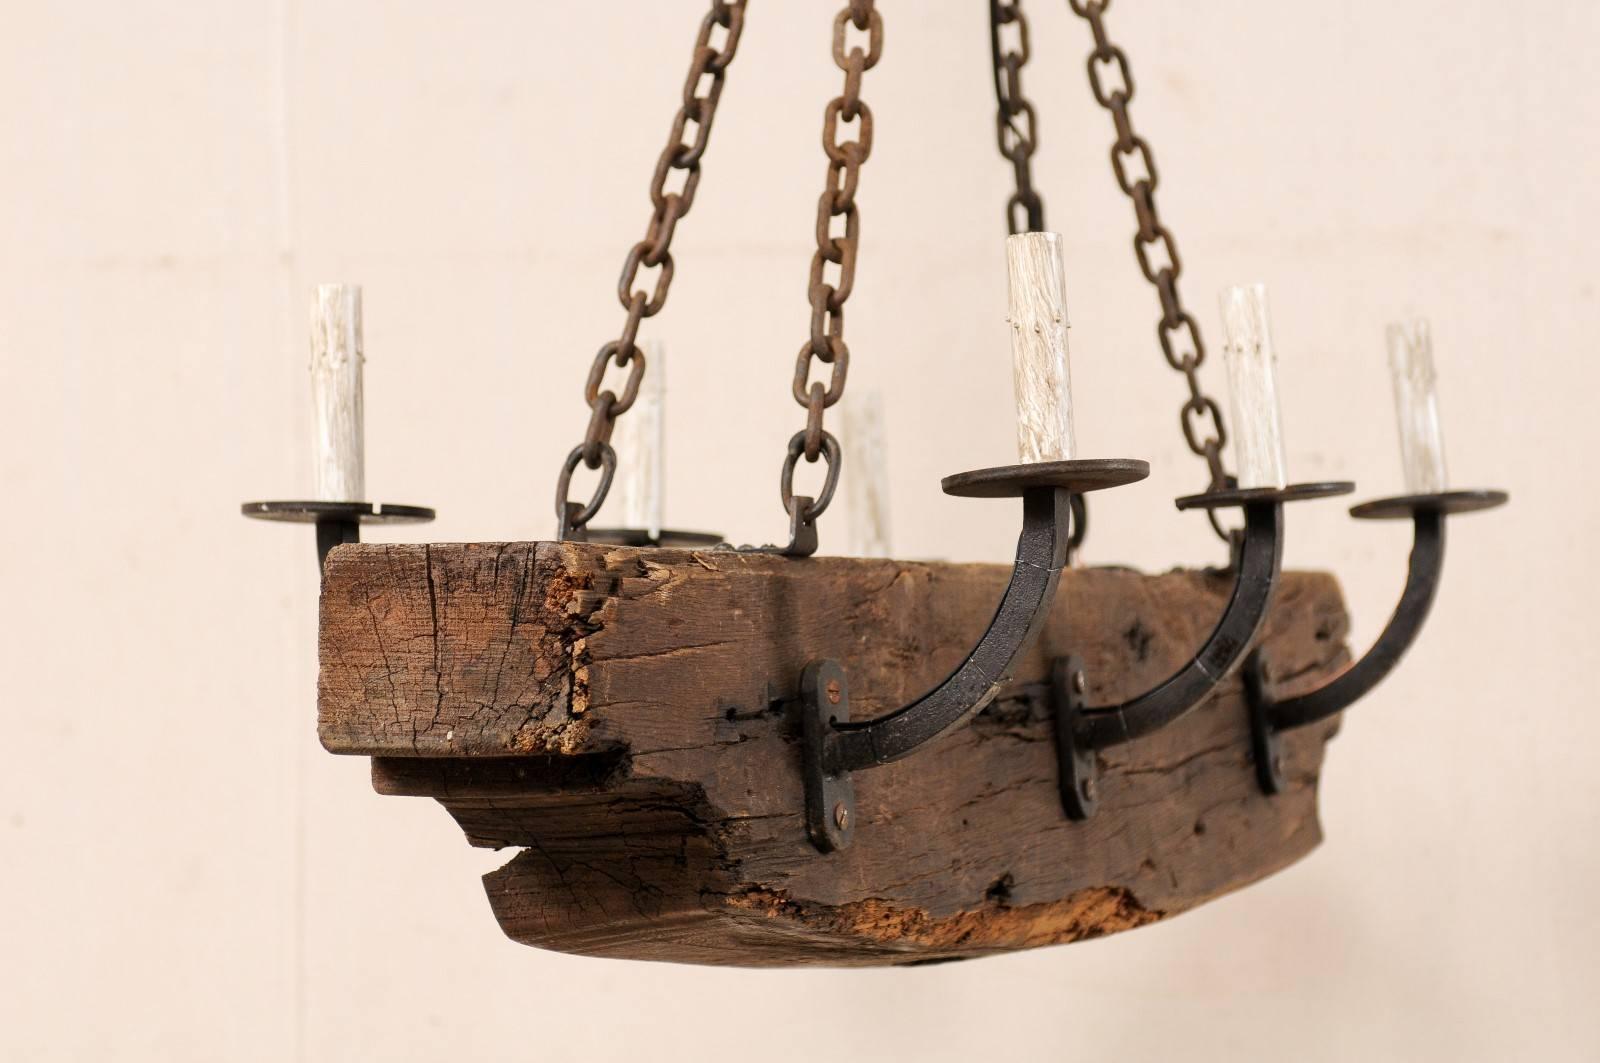 French Rustic Wood Beam Chandelier with Six Forged Iron Arms, Mid 20th C. For Sale 1